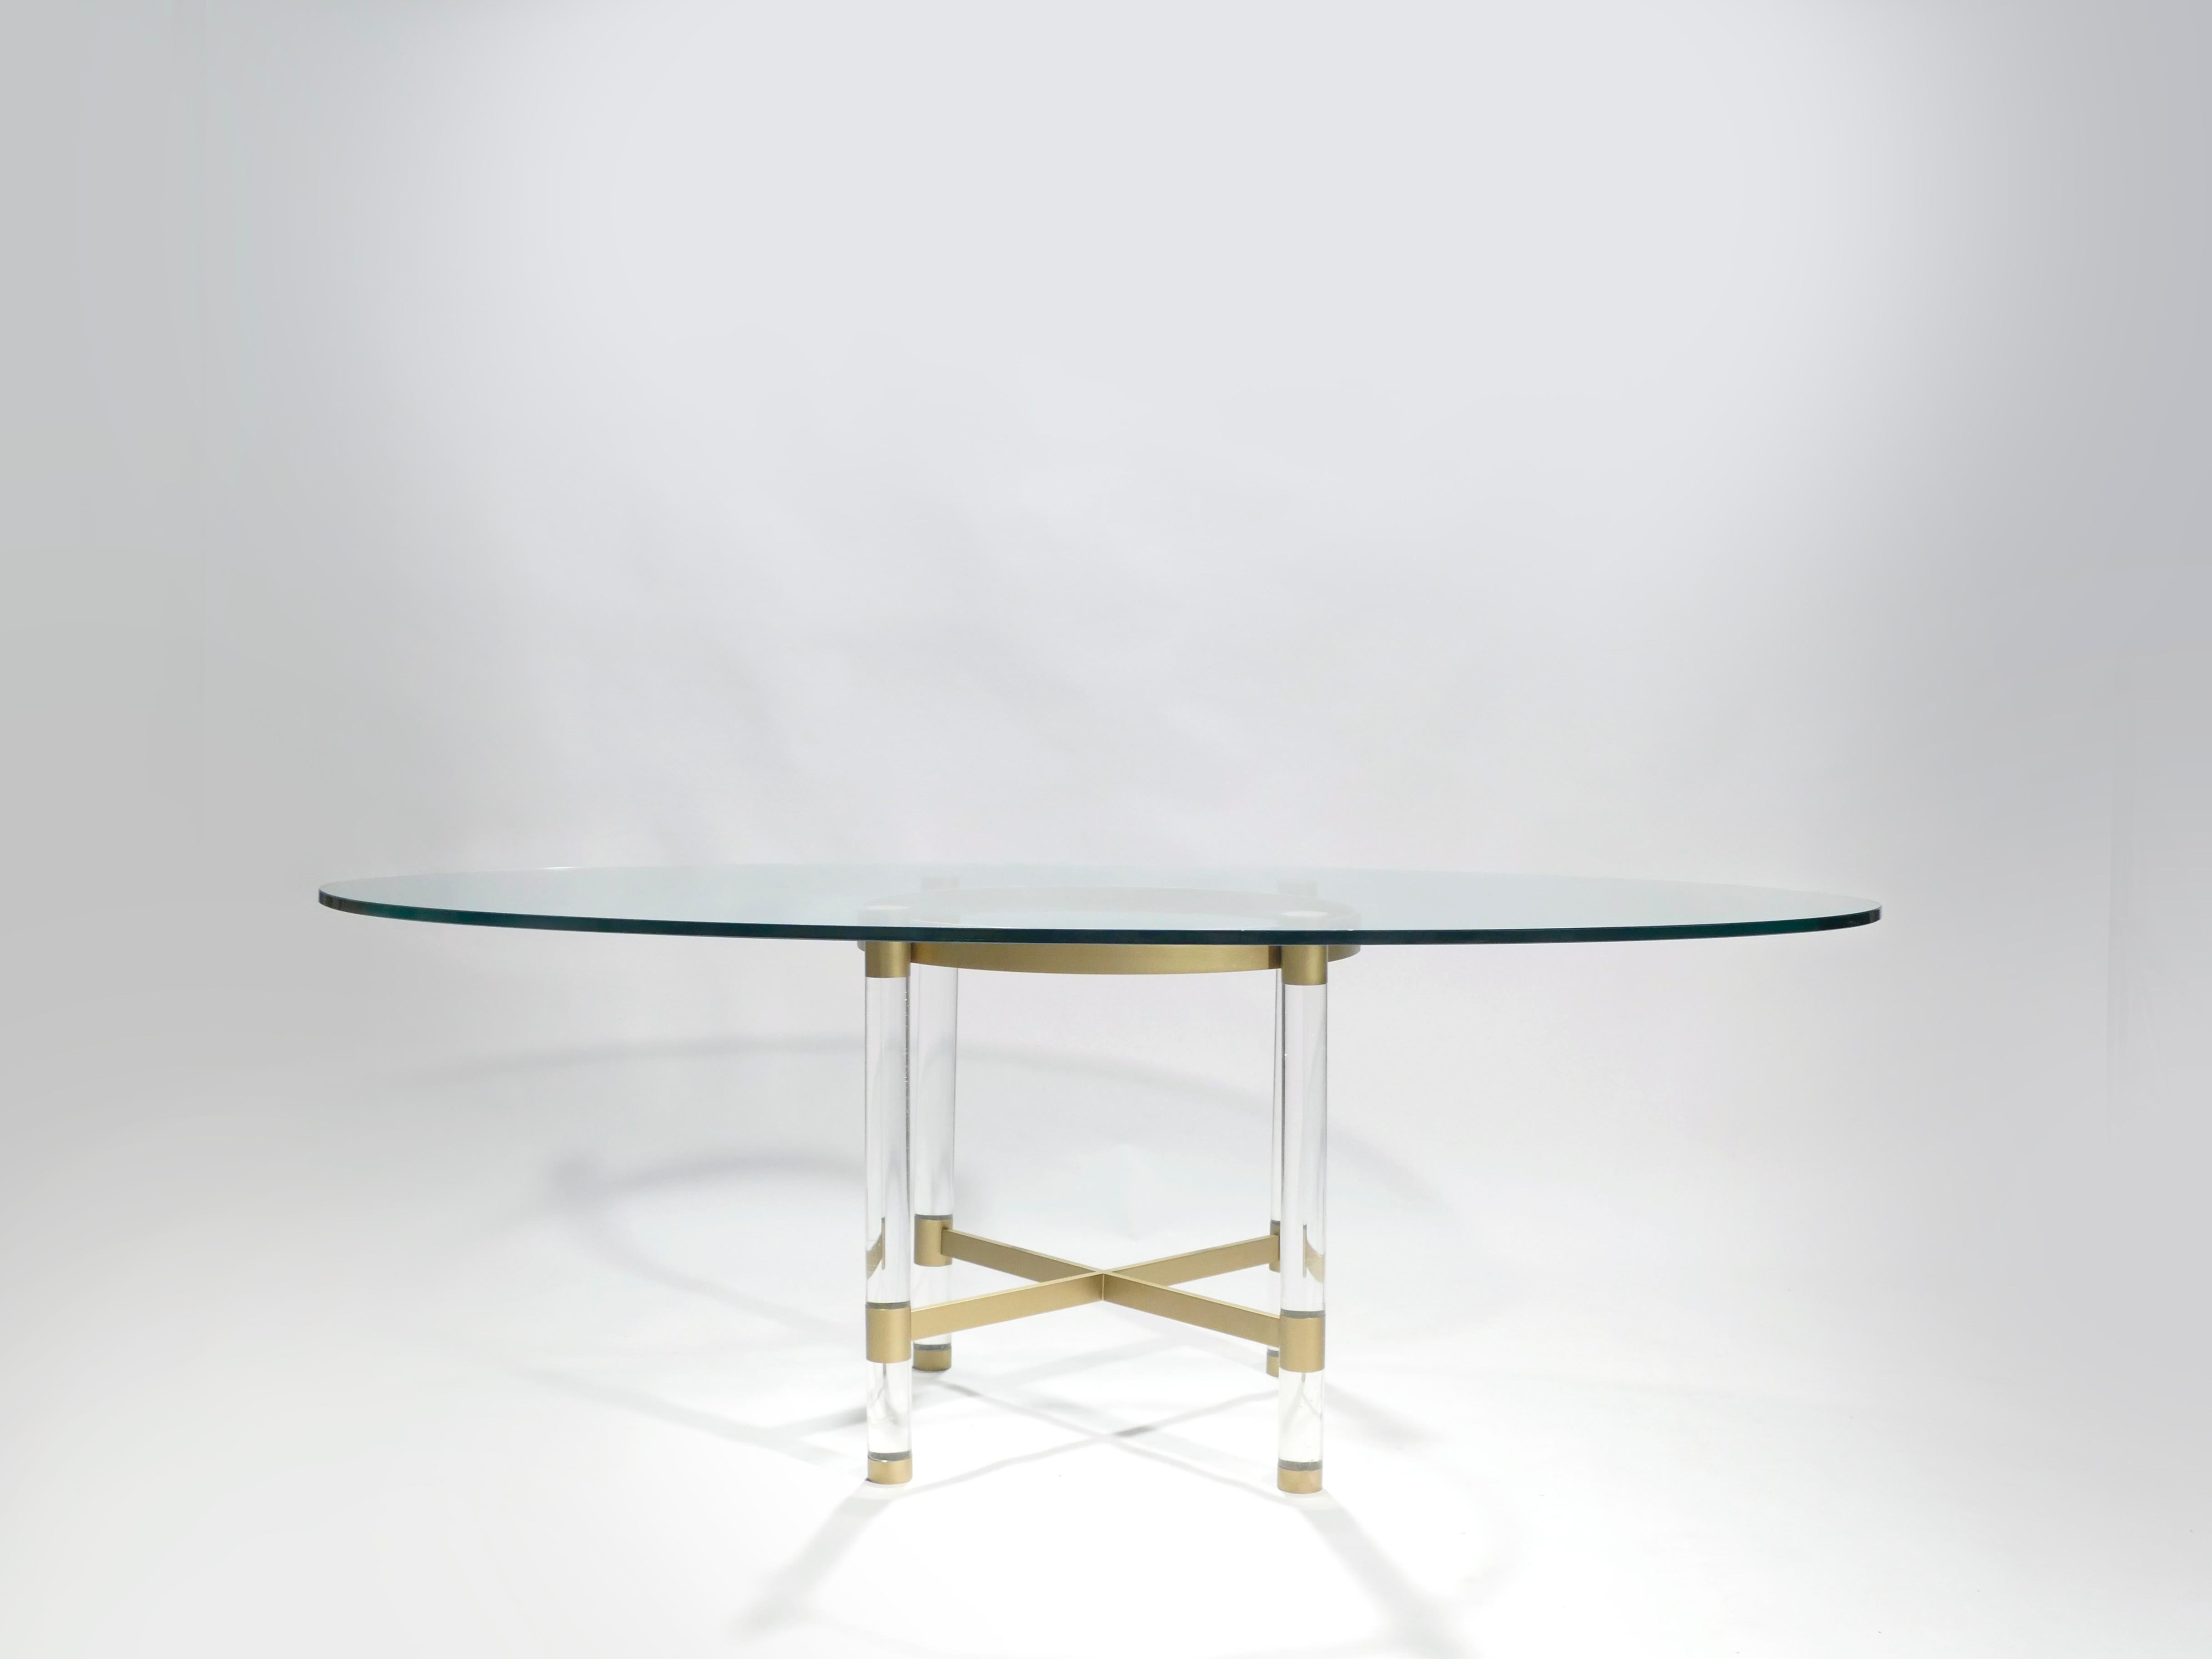 Italian Brass and Lucite Dining Table by Sandro Petti for Metalarte, 1970s For Sale